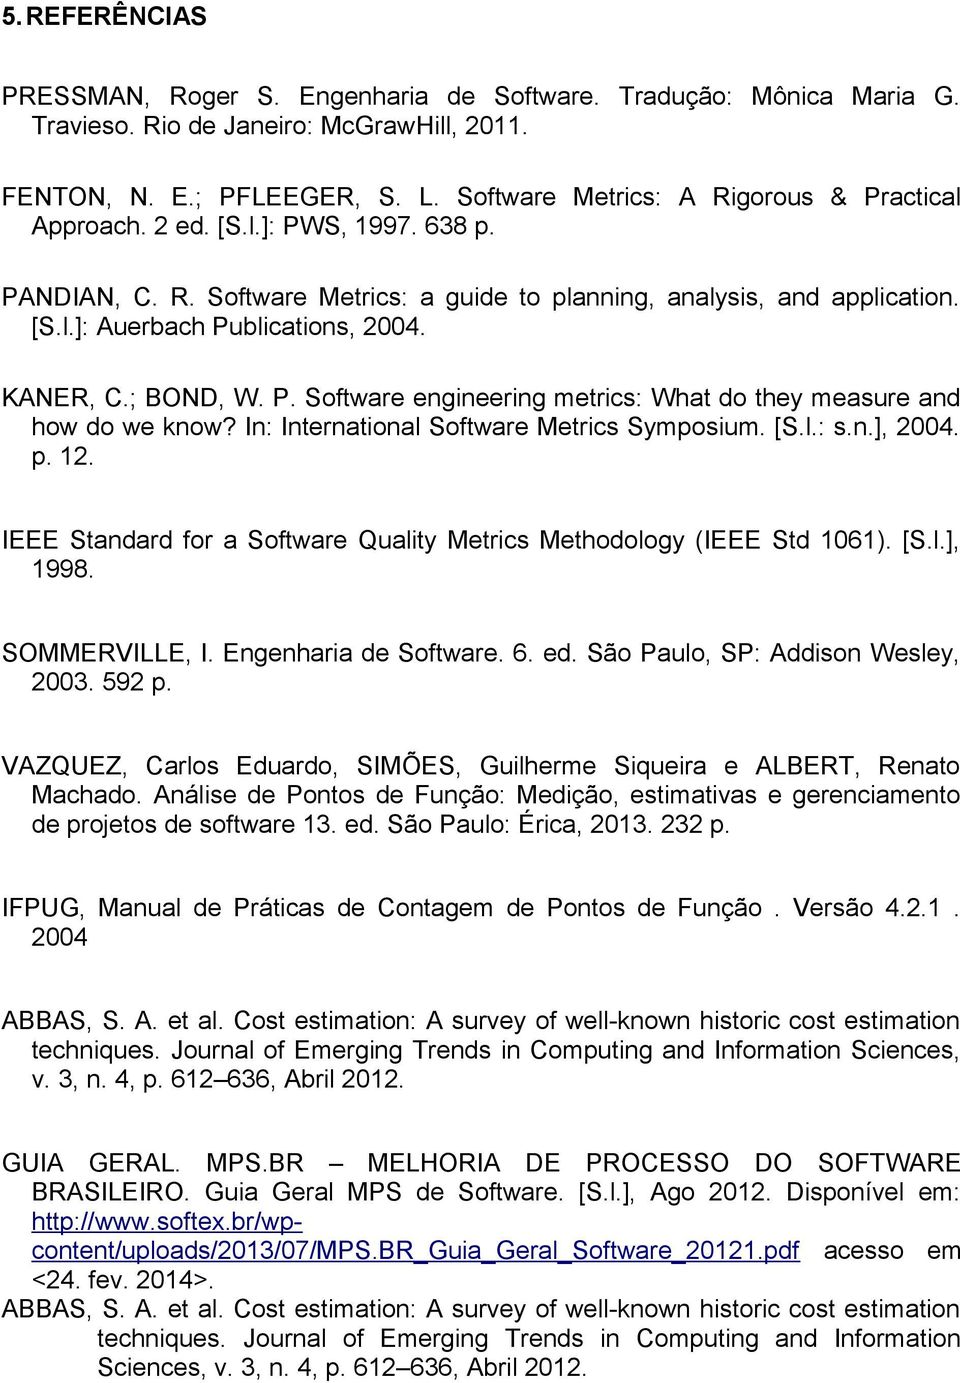 KANER, C.; BOND, W. P. Software engineering metrics: What do they measure and how do we know? In: International Software Metrics Symposium. [S.l.: s.n.], 2004. p. 12.